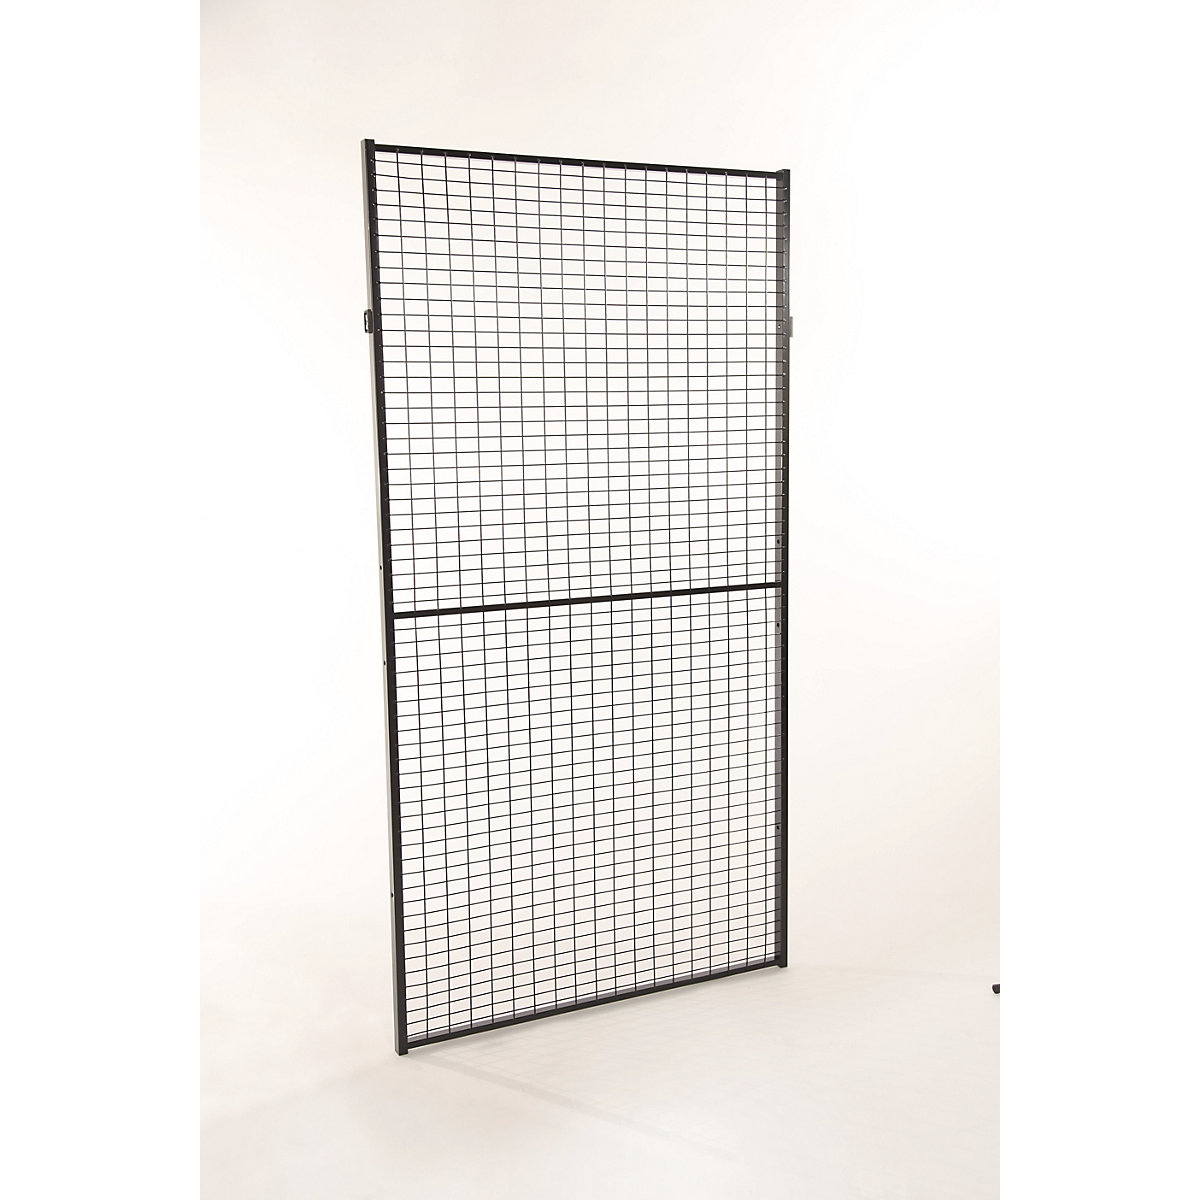 Axelent – X-GUARD CLASSIC machine protective fencing, wall section, height 1900 mm, width 600 mm